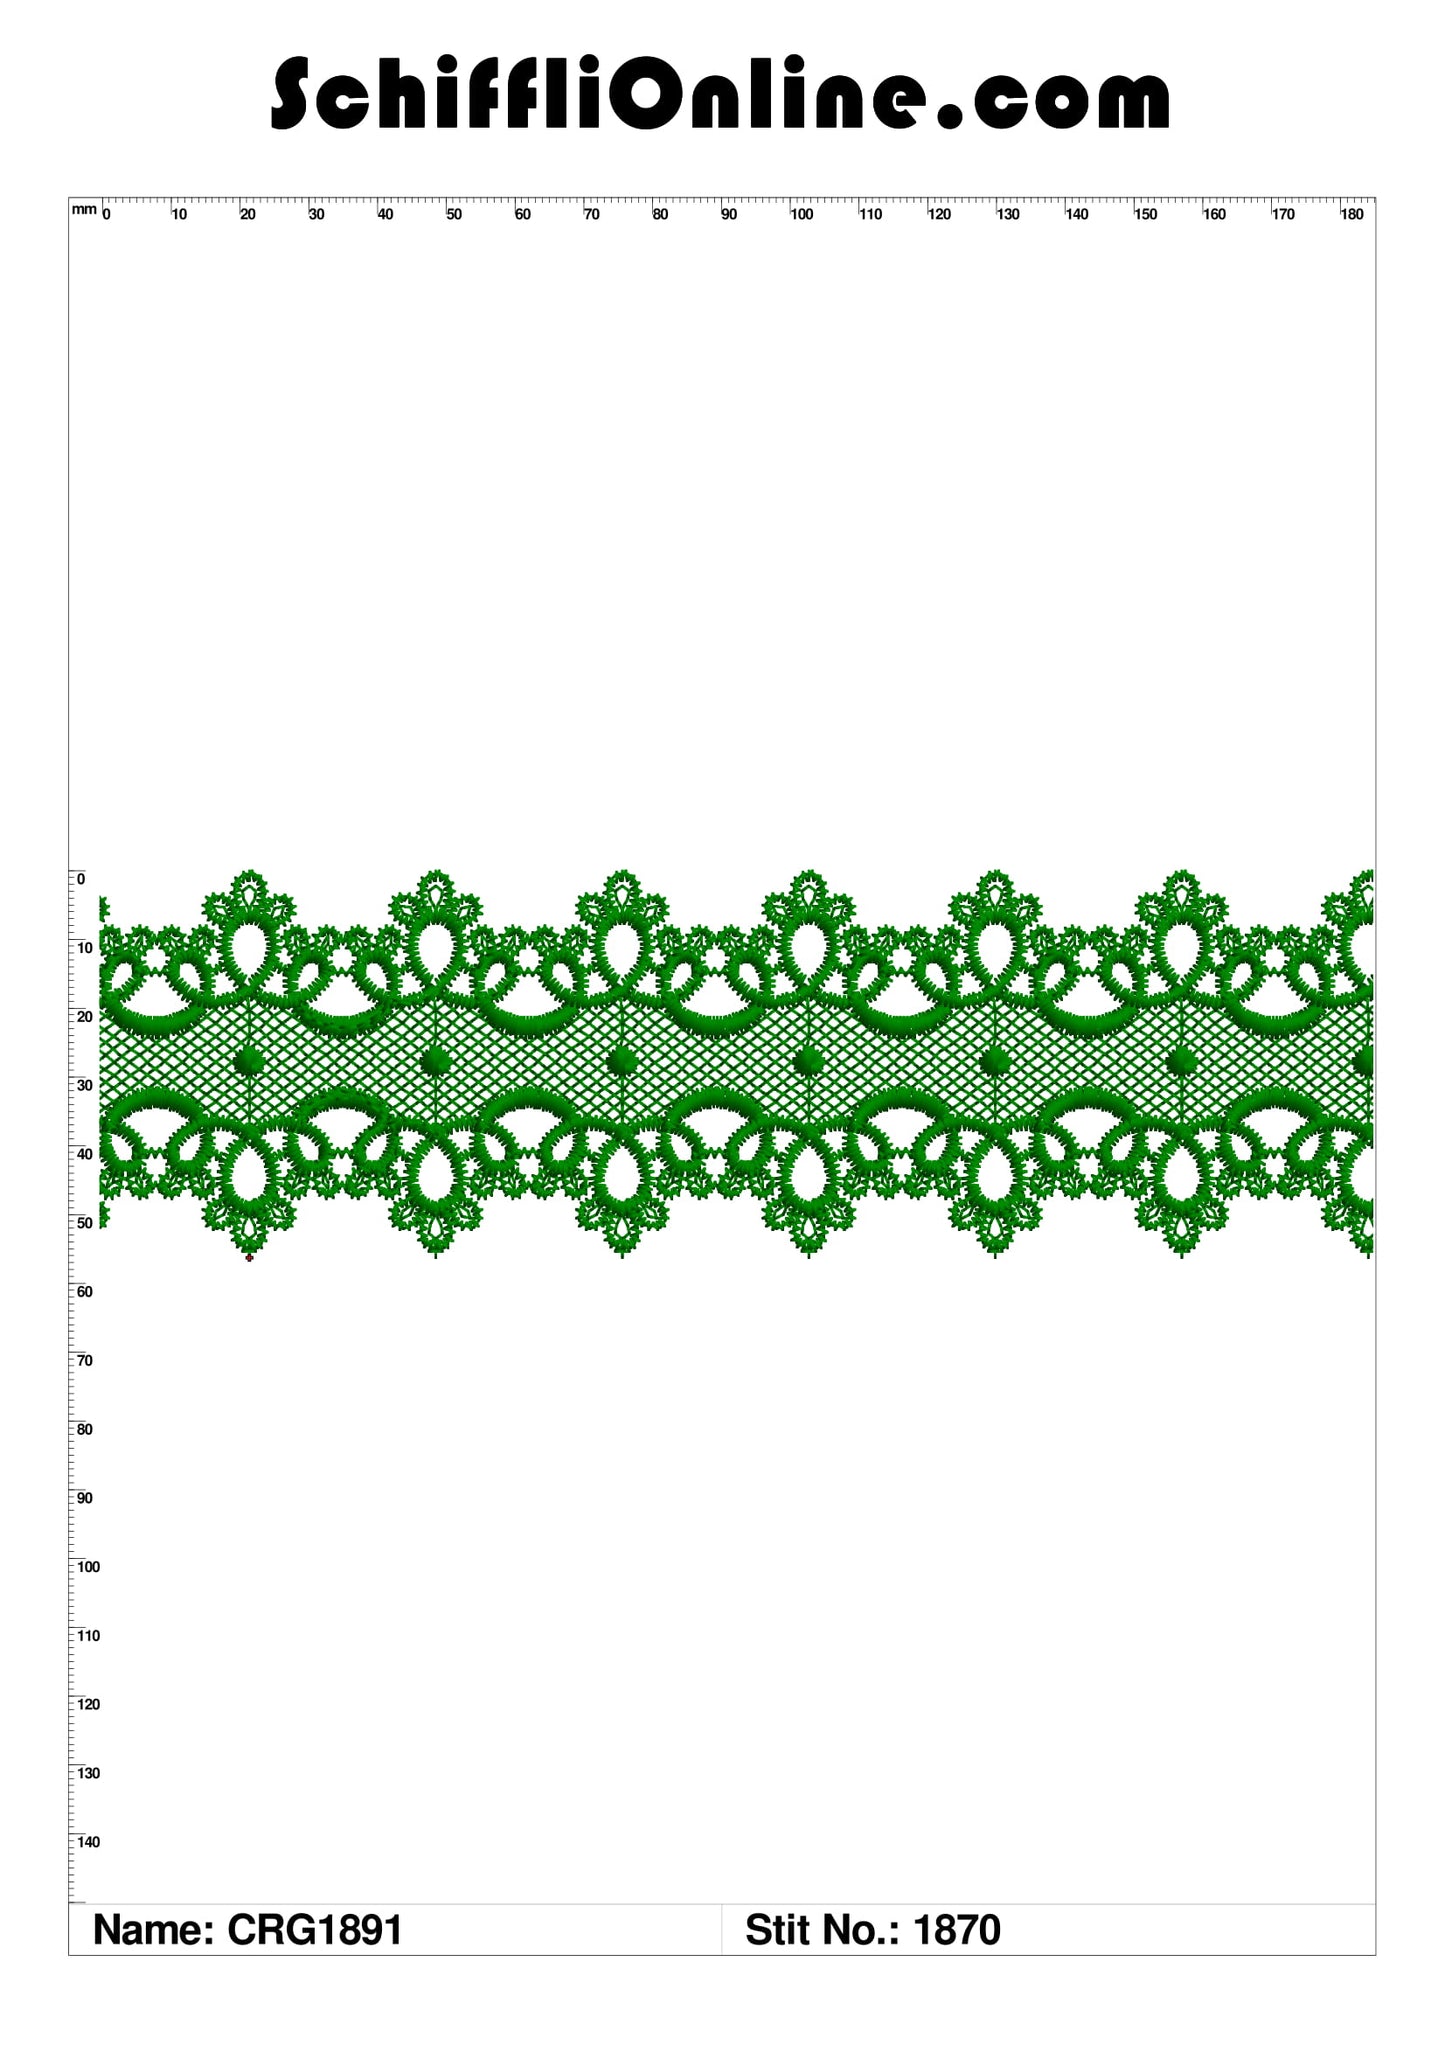 Book 136 CHEMICAL LACE 4X4 50 DESIGNS